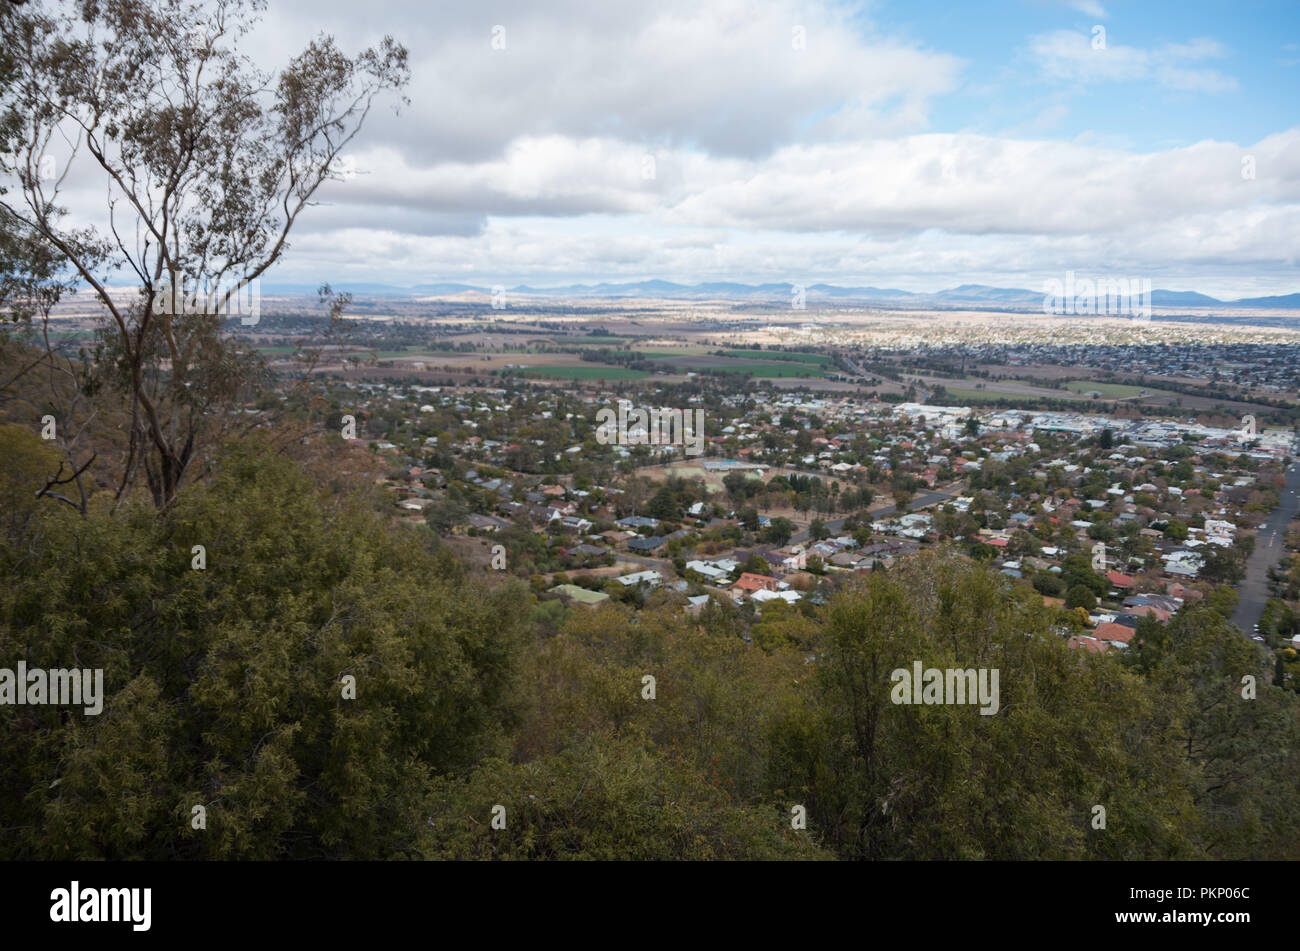 Tamworth from the lookout on the oxley scenic lookout Stock Photo